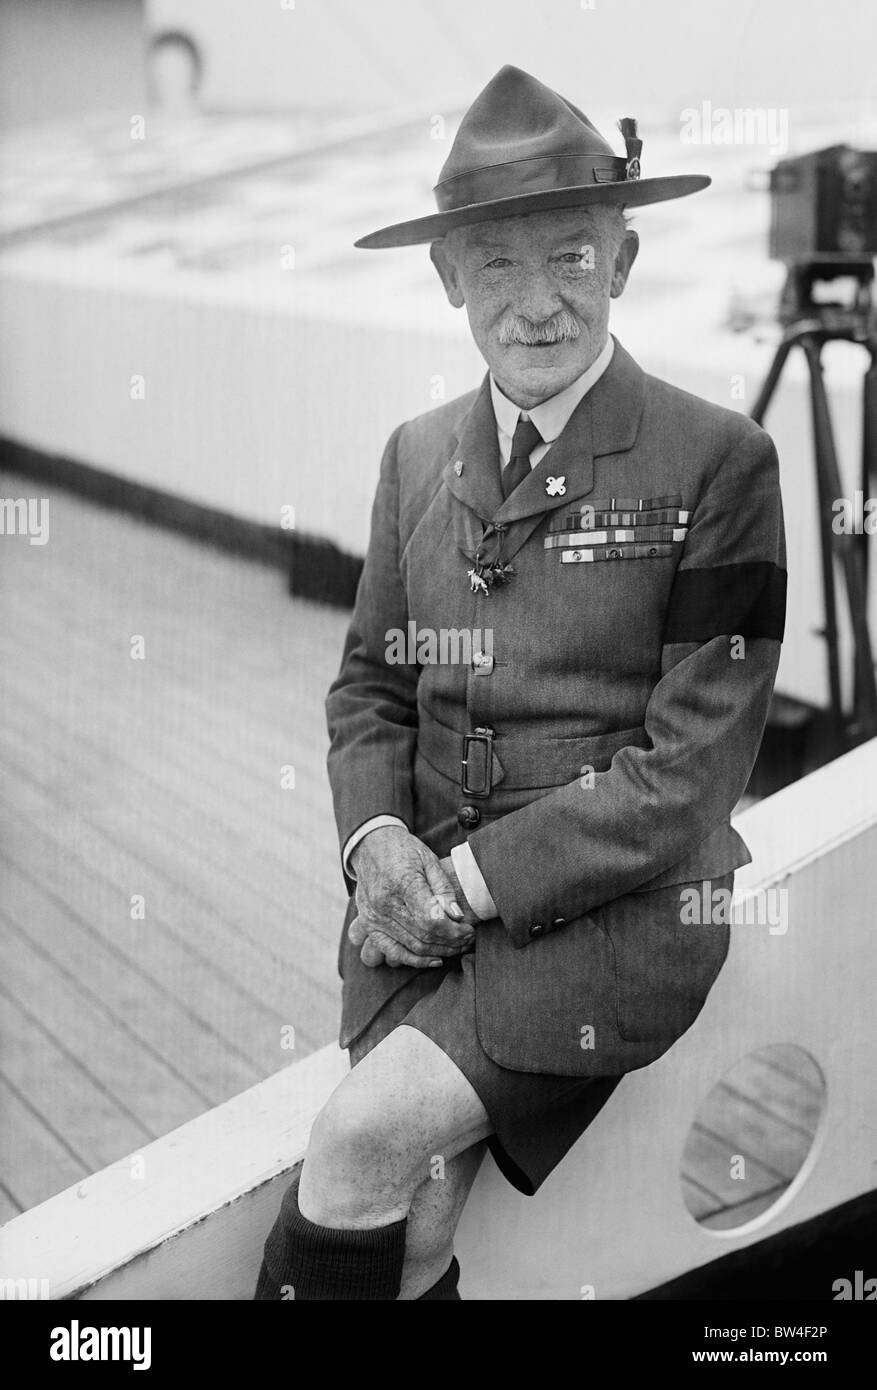 Vintage photo c1926 of Robert Baden-Powell (1857 - 1941) - the British Army General who was the founder of the Scout Movement. Stock Photo